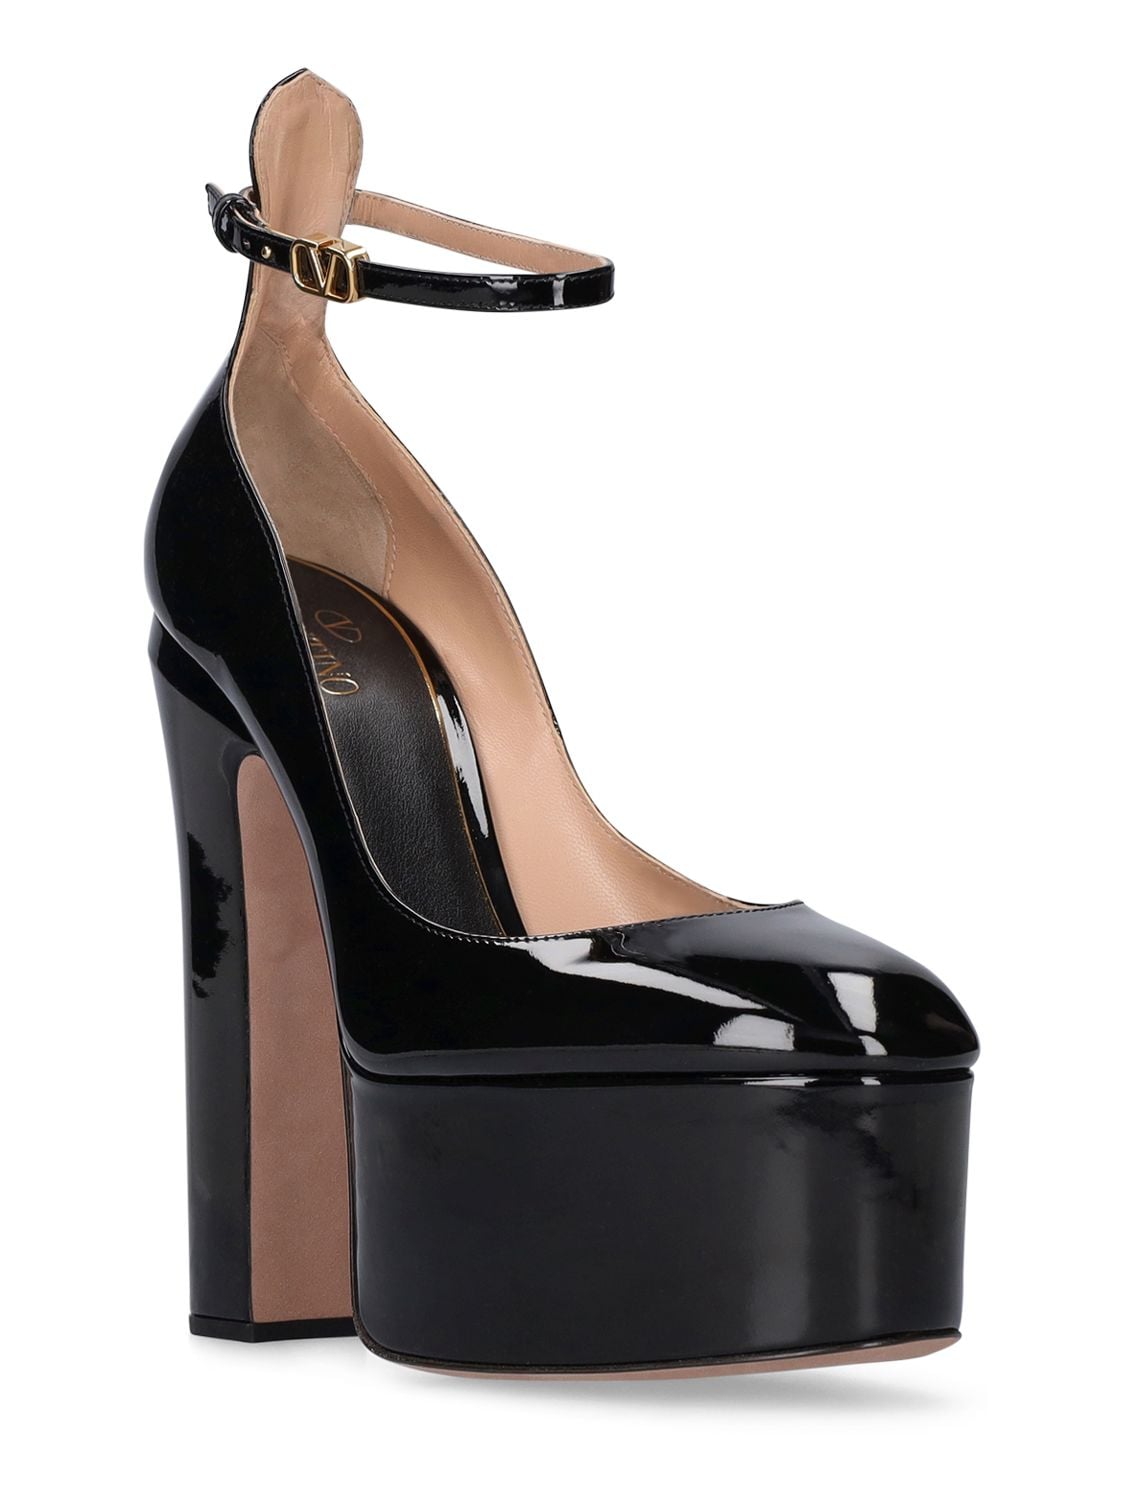 Shop Valentino 155mm Tango Patent Leather Pumps In Black